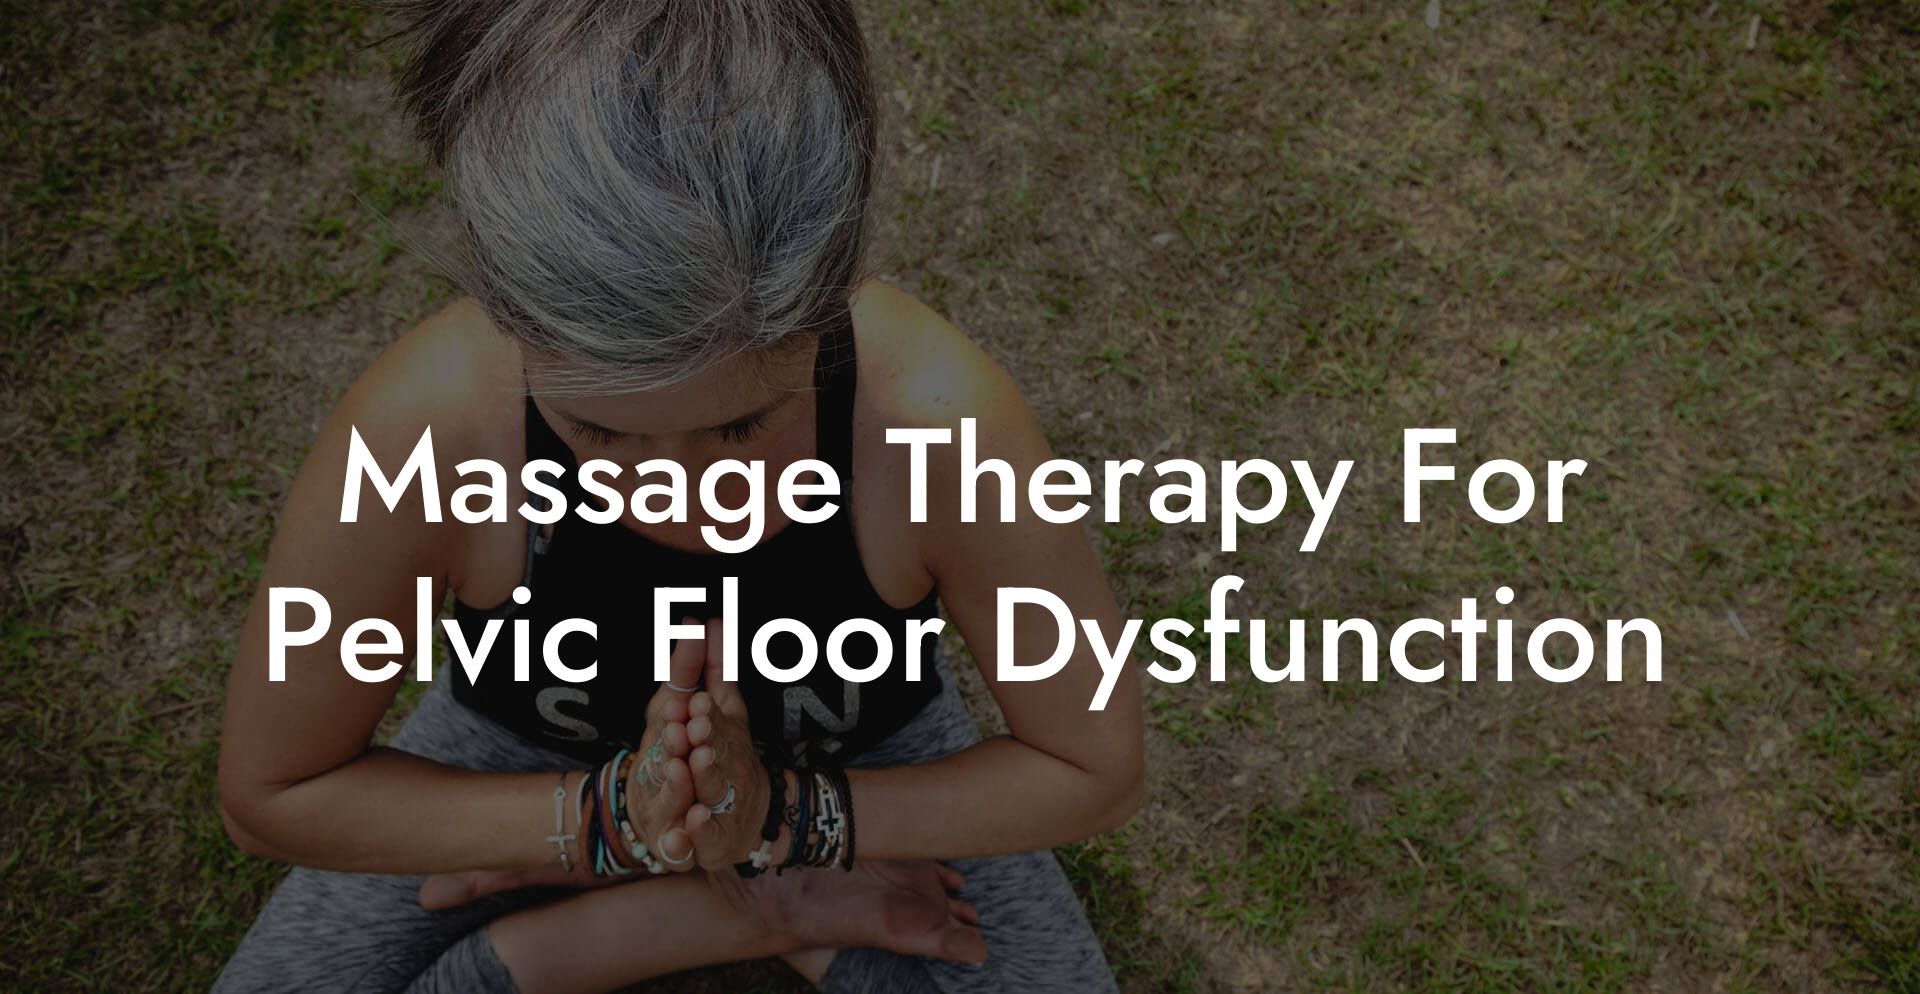 Massage Therapy For Pelvic Floor Dysfunction